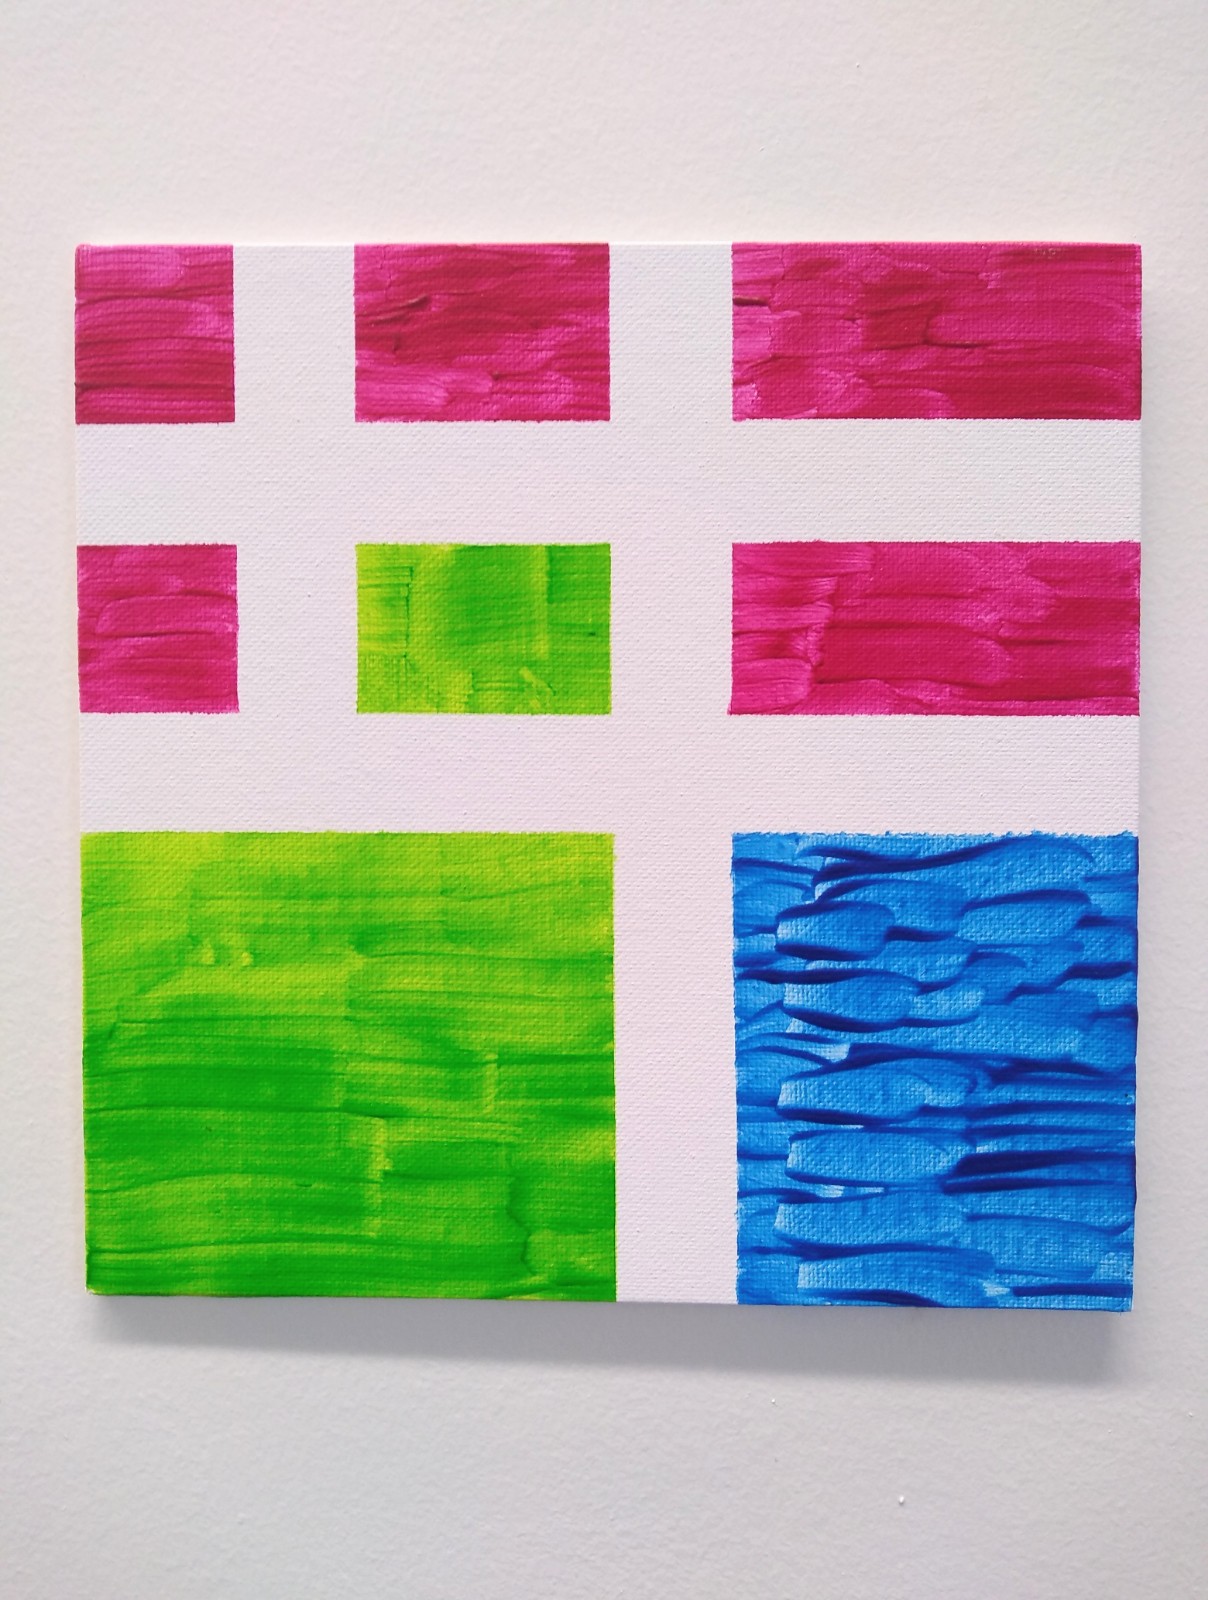 Pink and green rectangles above two large green and blue squares.